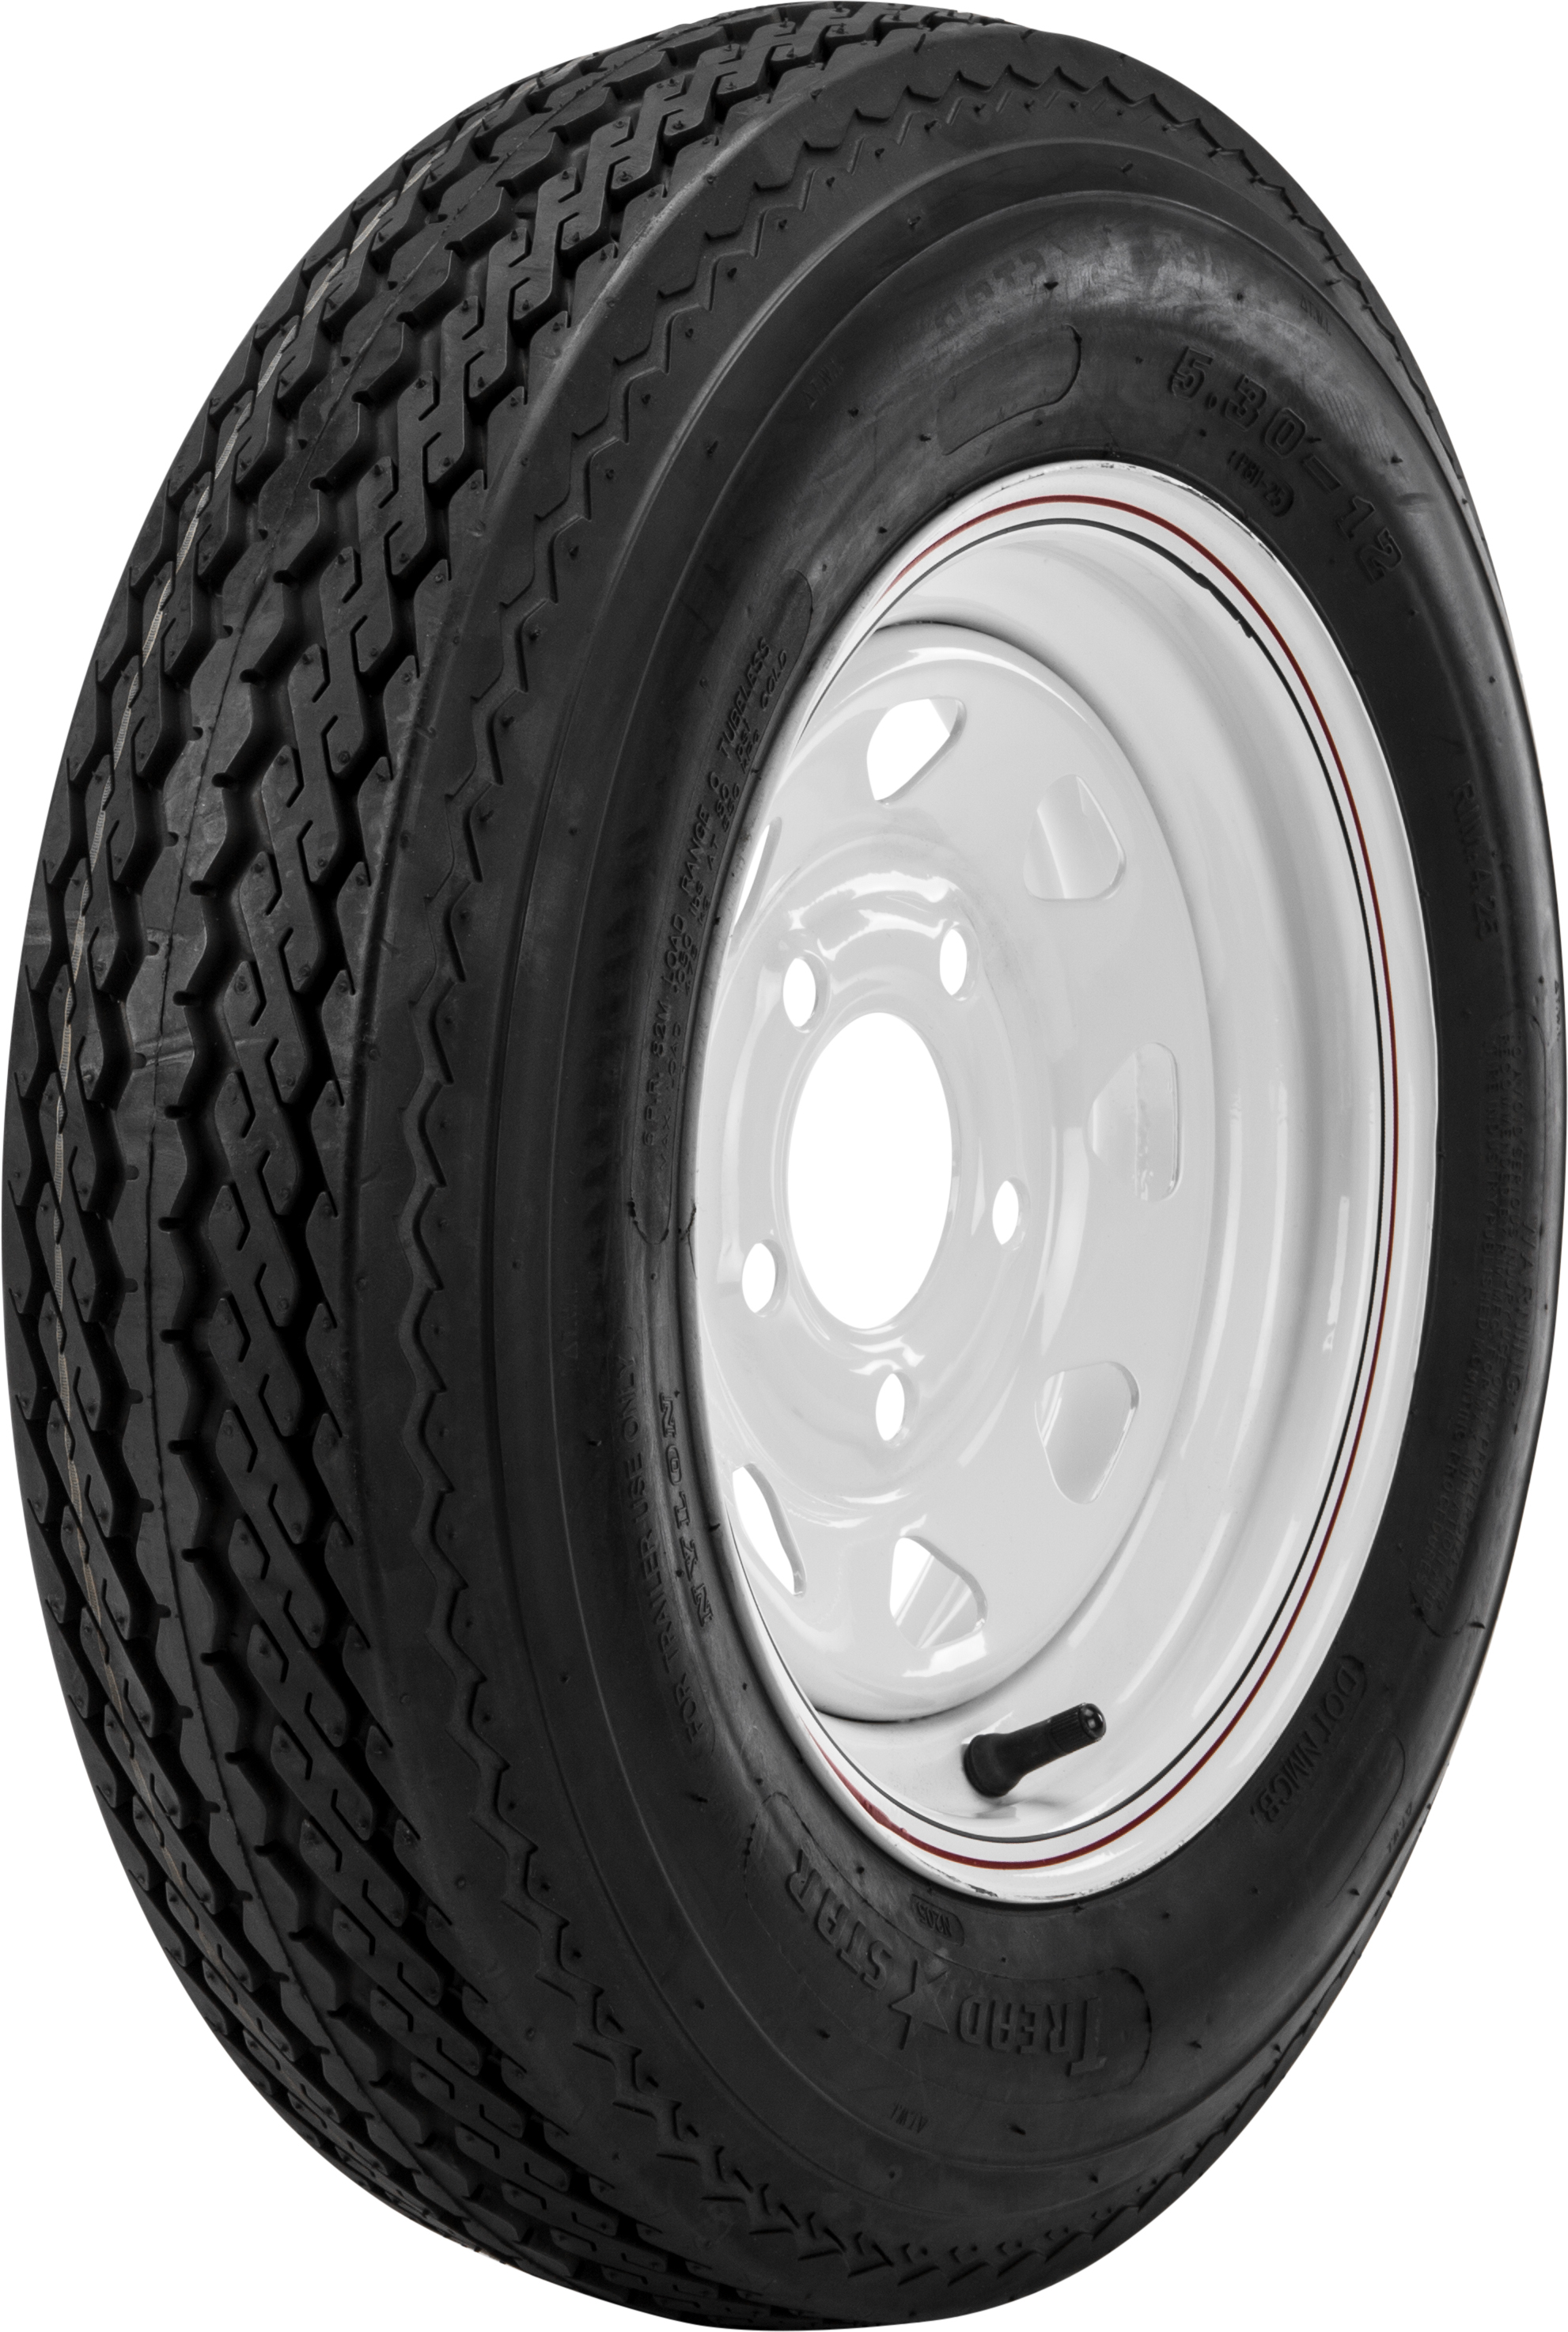 Trailer Tire & 8 Spoke Steel Wheel Assembly - 5.3-12 Tire on 12x4 - 5 on 4.5 Wheel - Click Image to Close